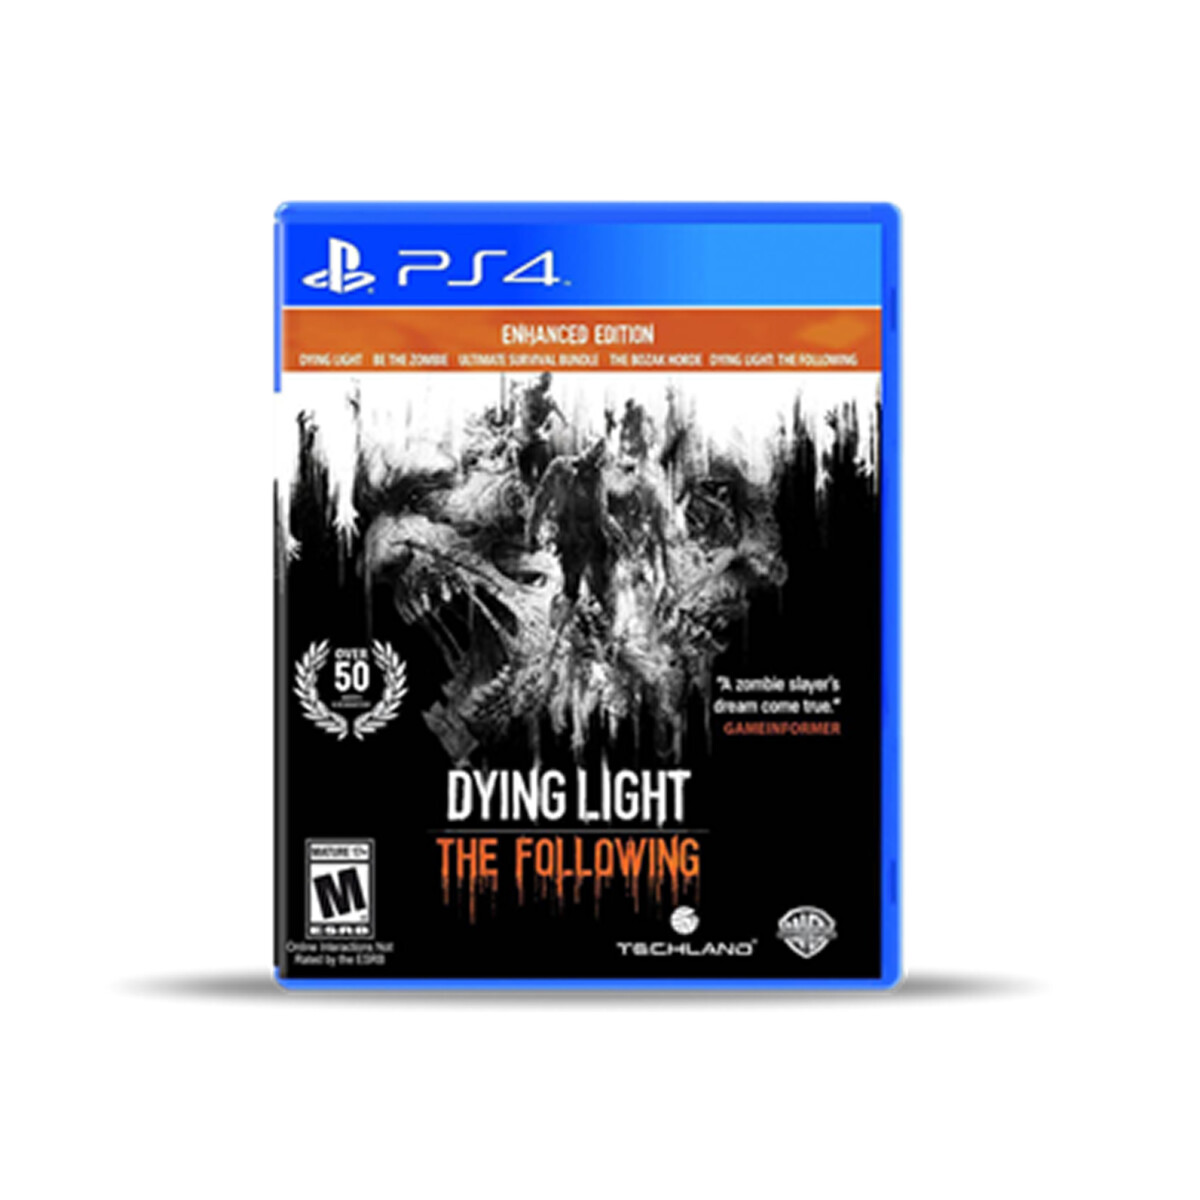 PS4 DYING LIGHT THE FOLLOWING 